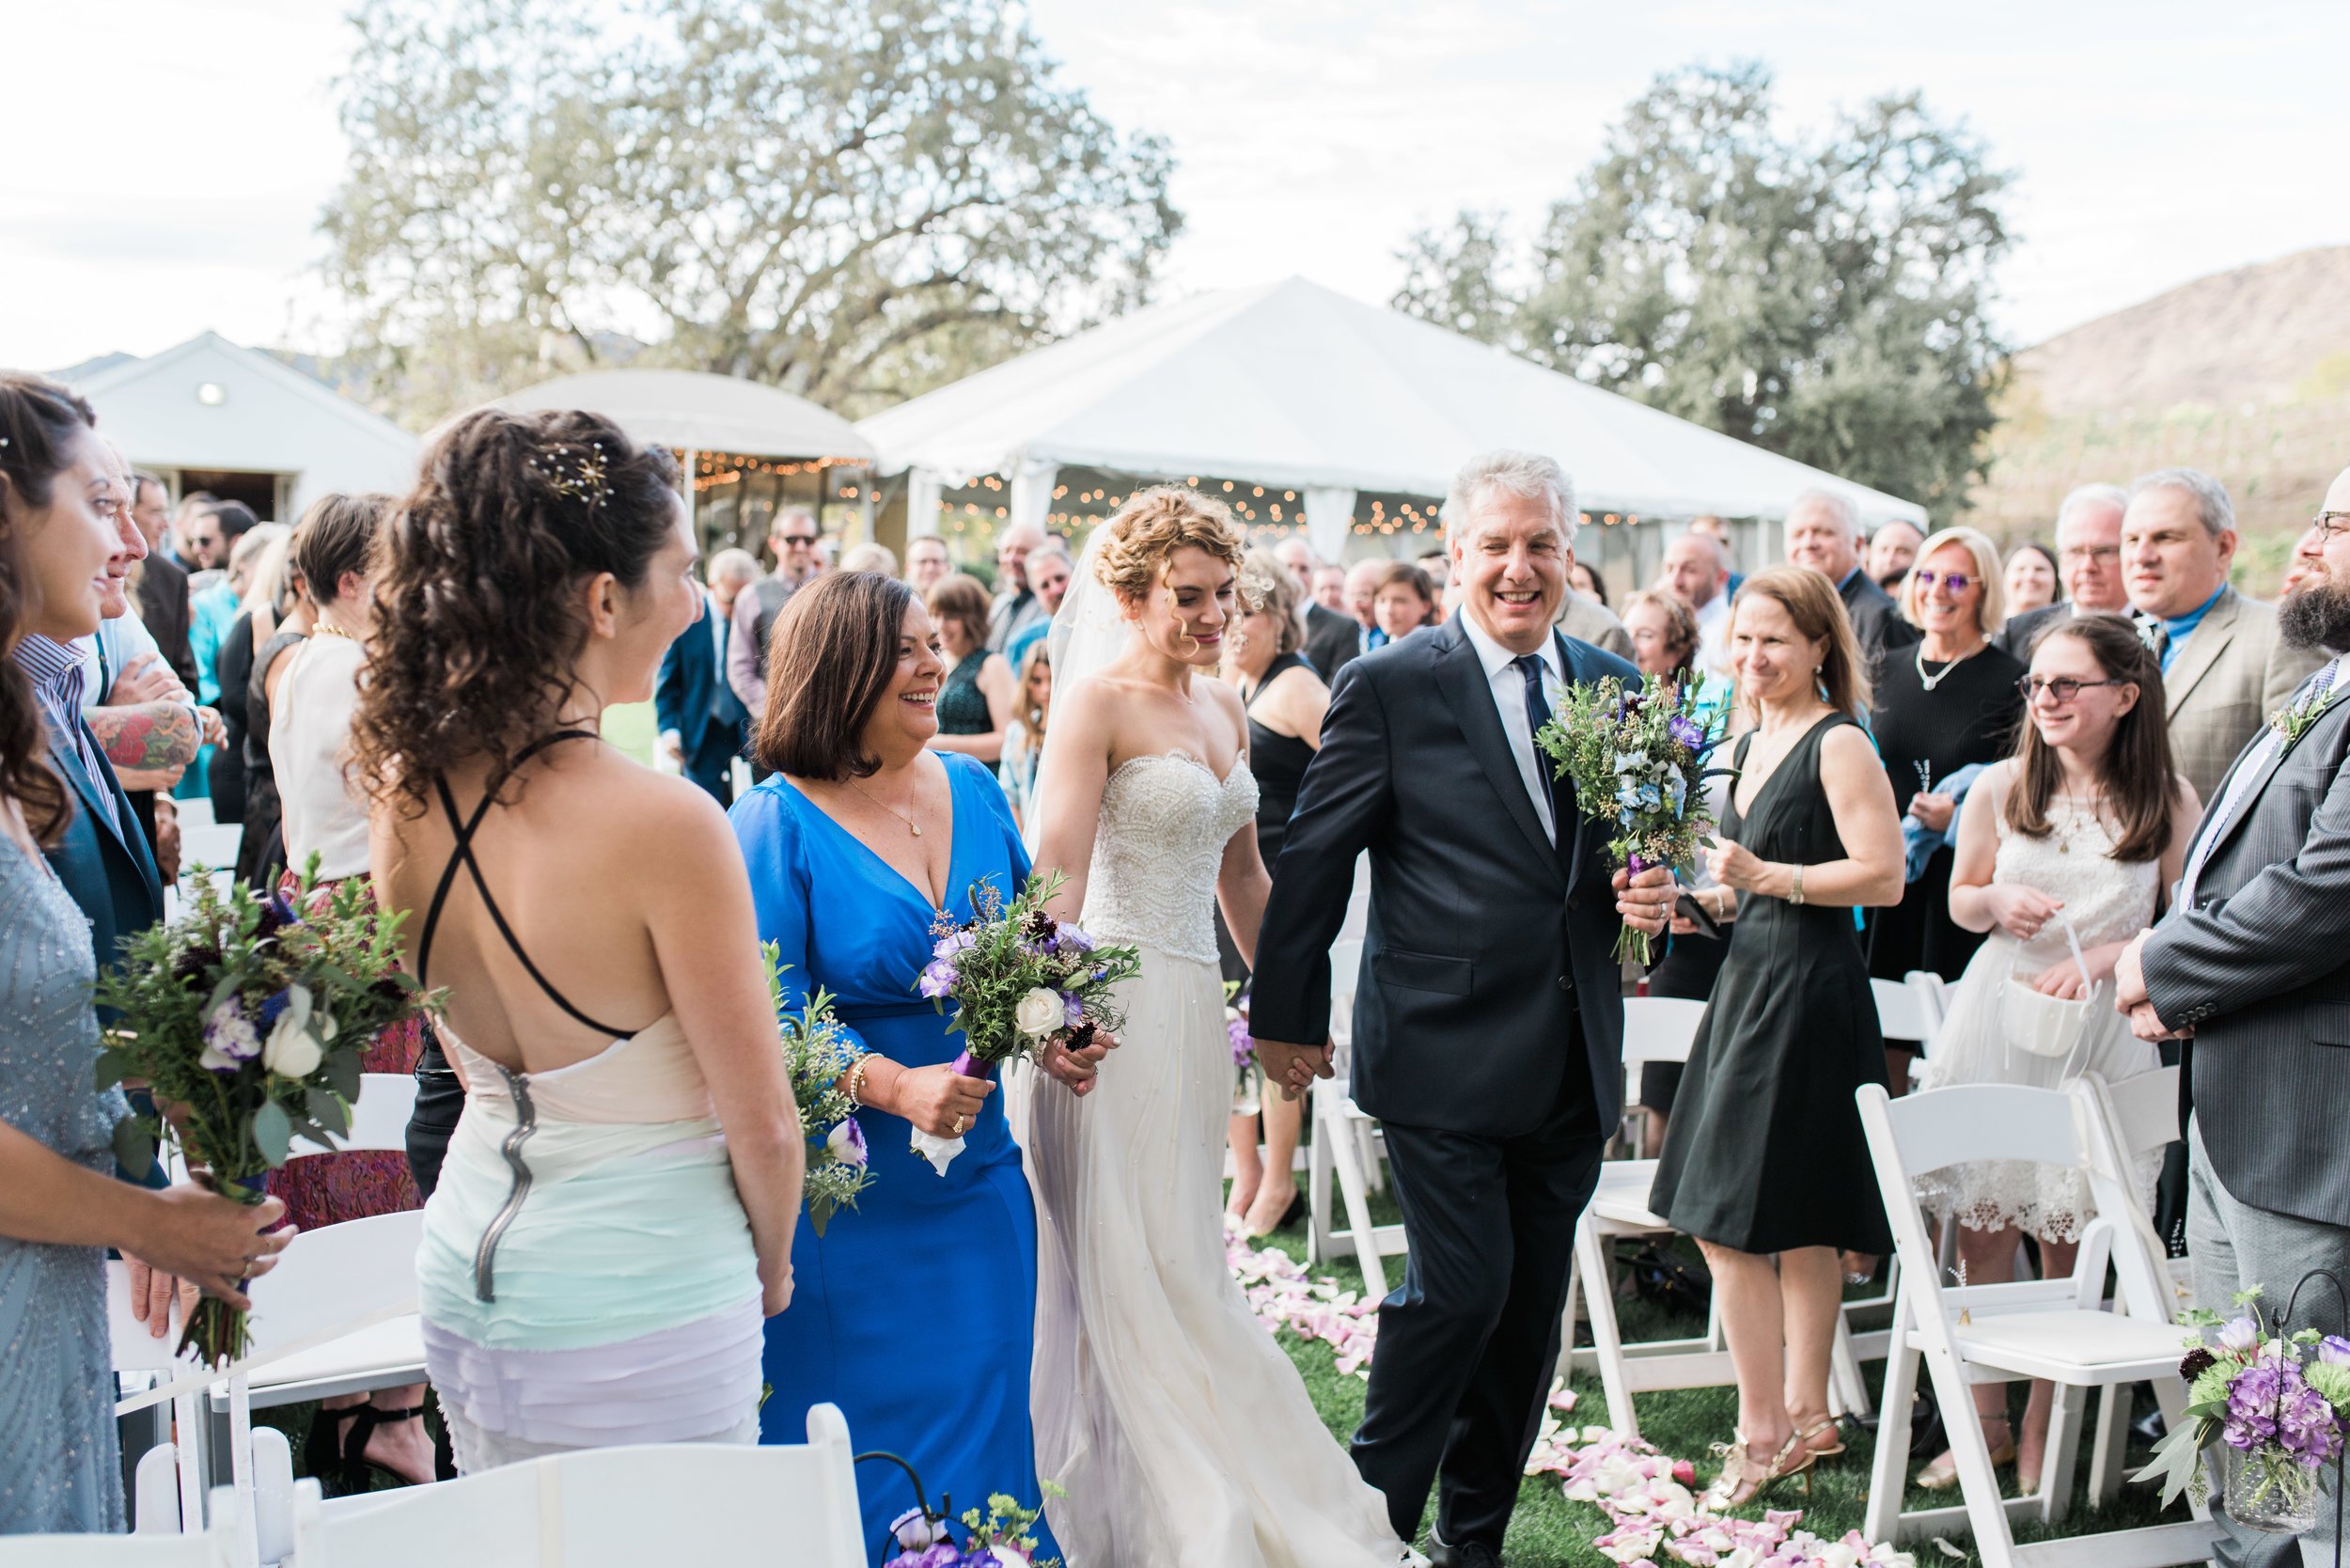 replacement of parents and mer walking down the isle .jpg